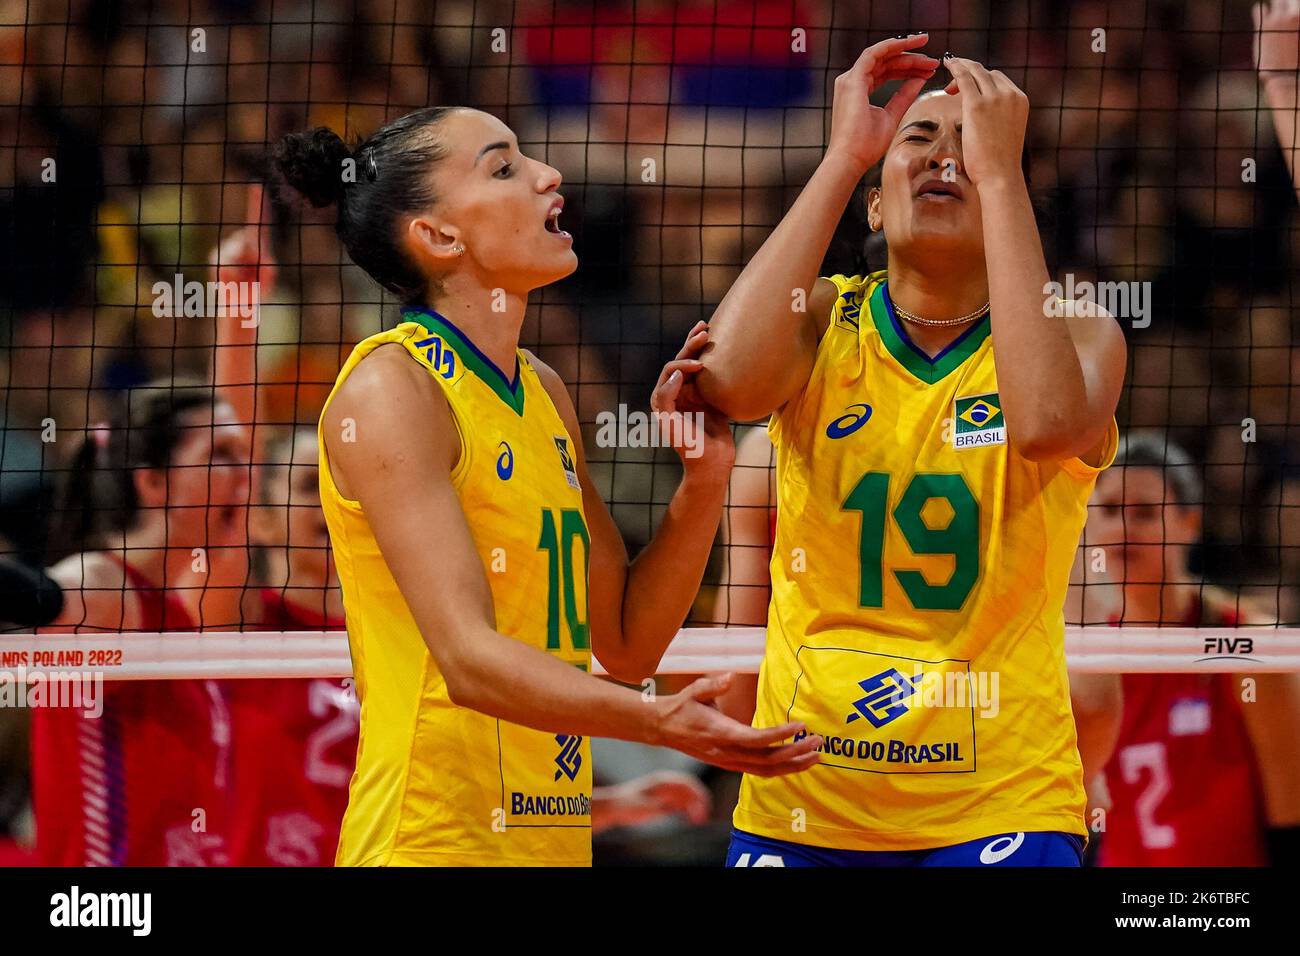 Apeldoorn, Netherlands. 15th Oct, 2022. APELDOORN, NETHERLANDS - OCTOBER 15: Gabriela Gabi Braga Guimaraes of Brazil and Tainara Lemes Santos of Brazil react during the Final match between Brazil and Serbia on Day 20 of the FIVB Volleyball Womens World Championship 2022 at the Omnisport Apeldoorn on October 15, 2022 in Apeldoorn, Netherlands (Photo by Rene Nijhuis/Orange Pictures) Credit: Orange Pics BV/Alamy Live News Stock Photo